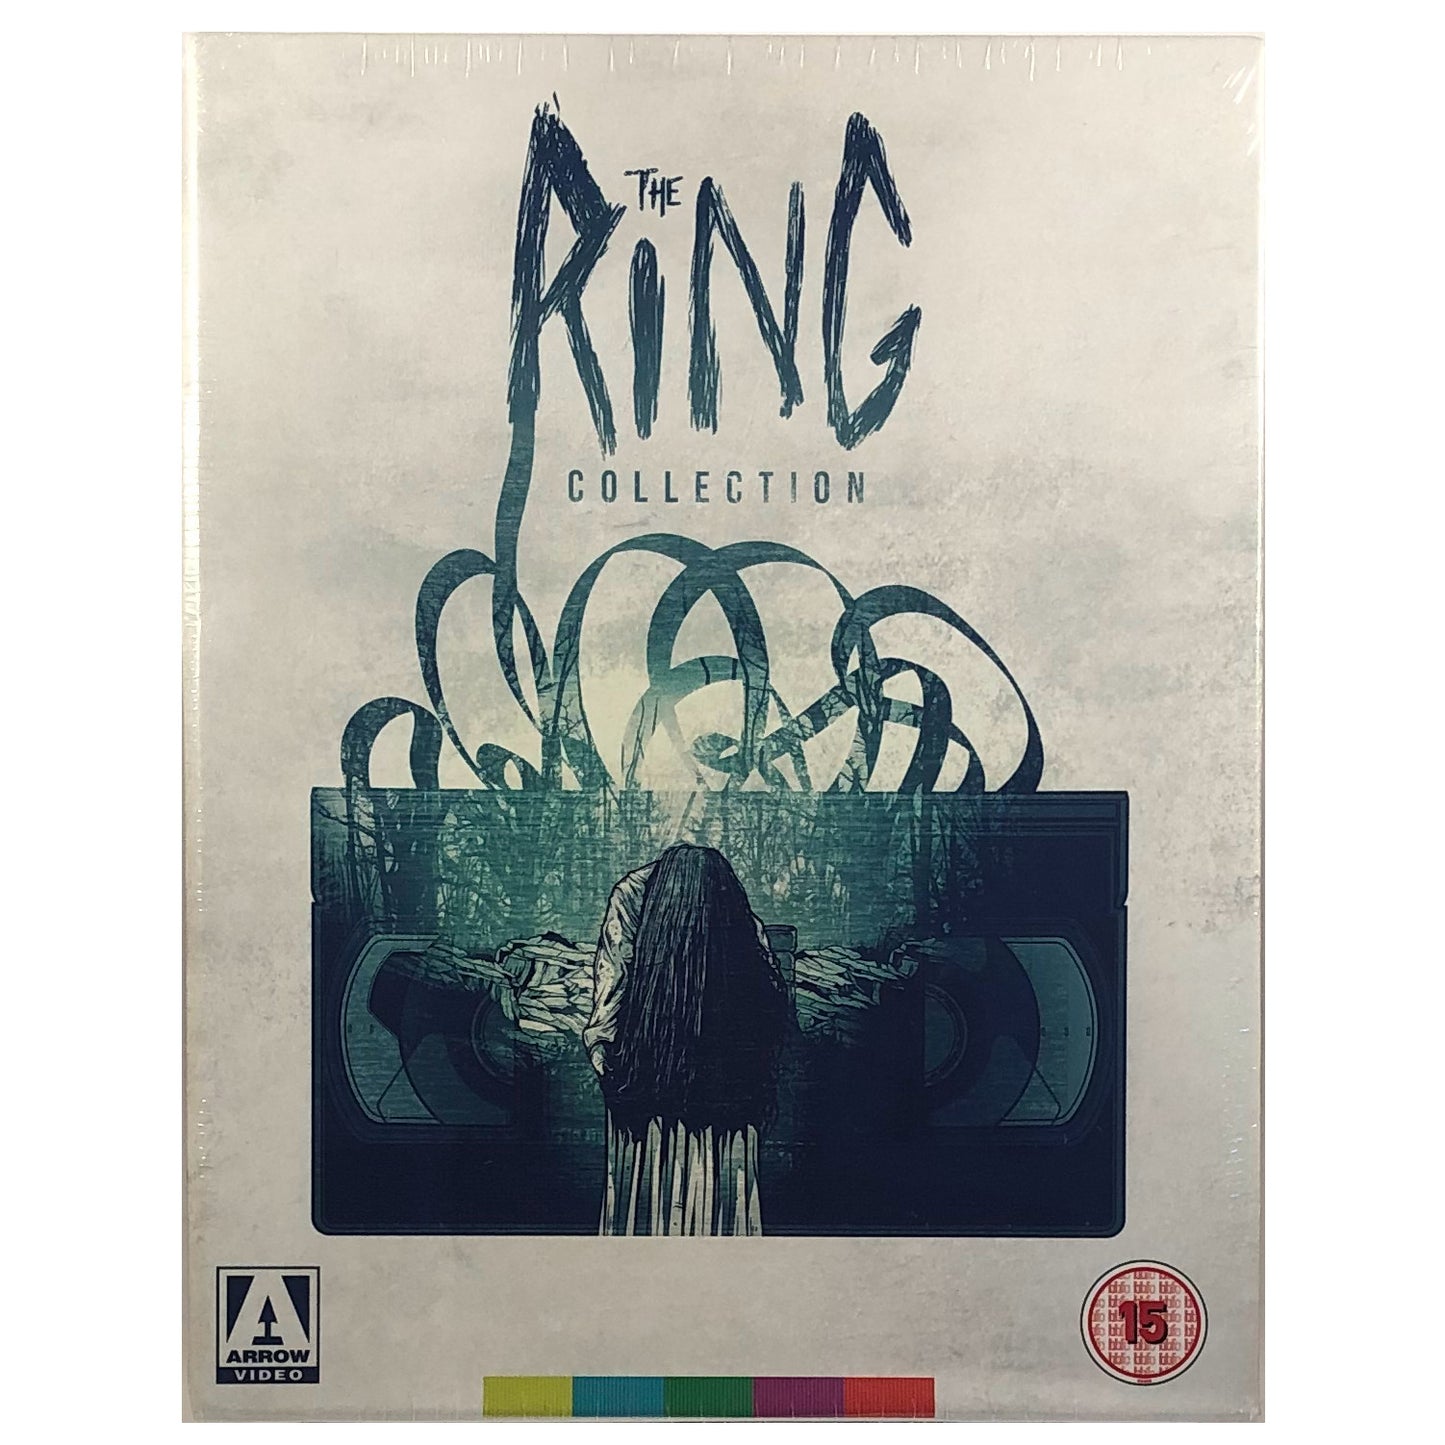 The Ring Collection Blu-Ray Box Set